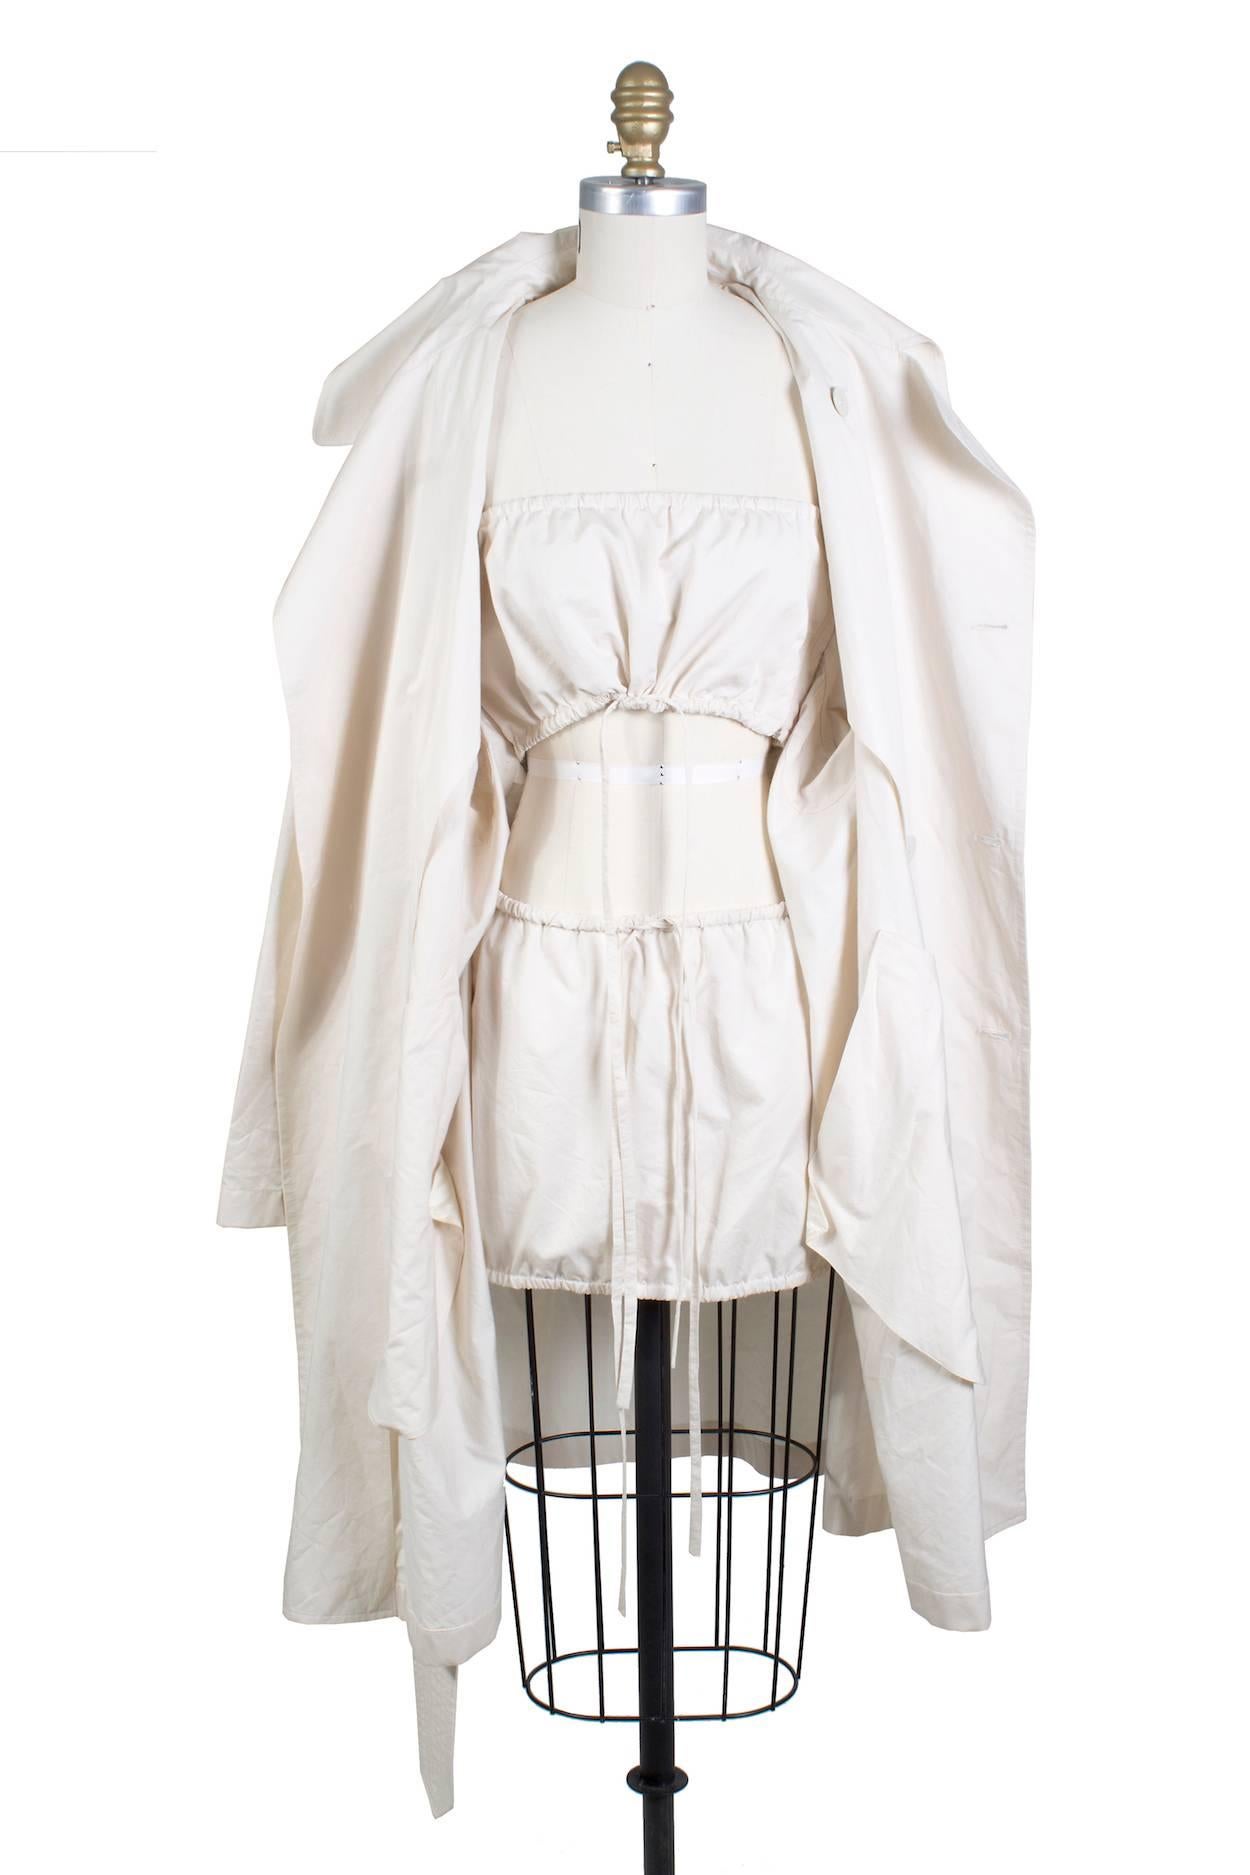 This is a beige trench coat by Jean Paul Gaultier c. 1990s.  It has an oversized fit and features an attached inner bando top and mini skirt (which both have elastic drawstring and zippers). The jacket is double breasted with irridescent buttons.